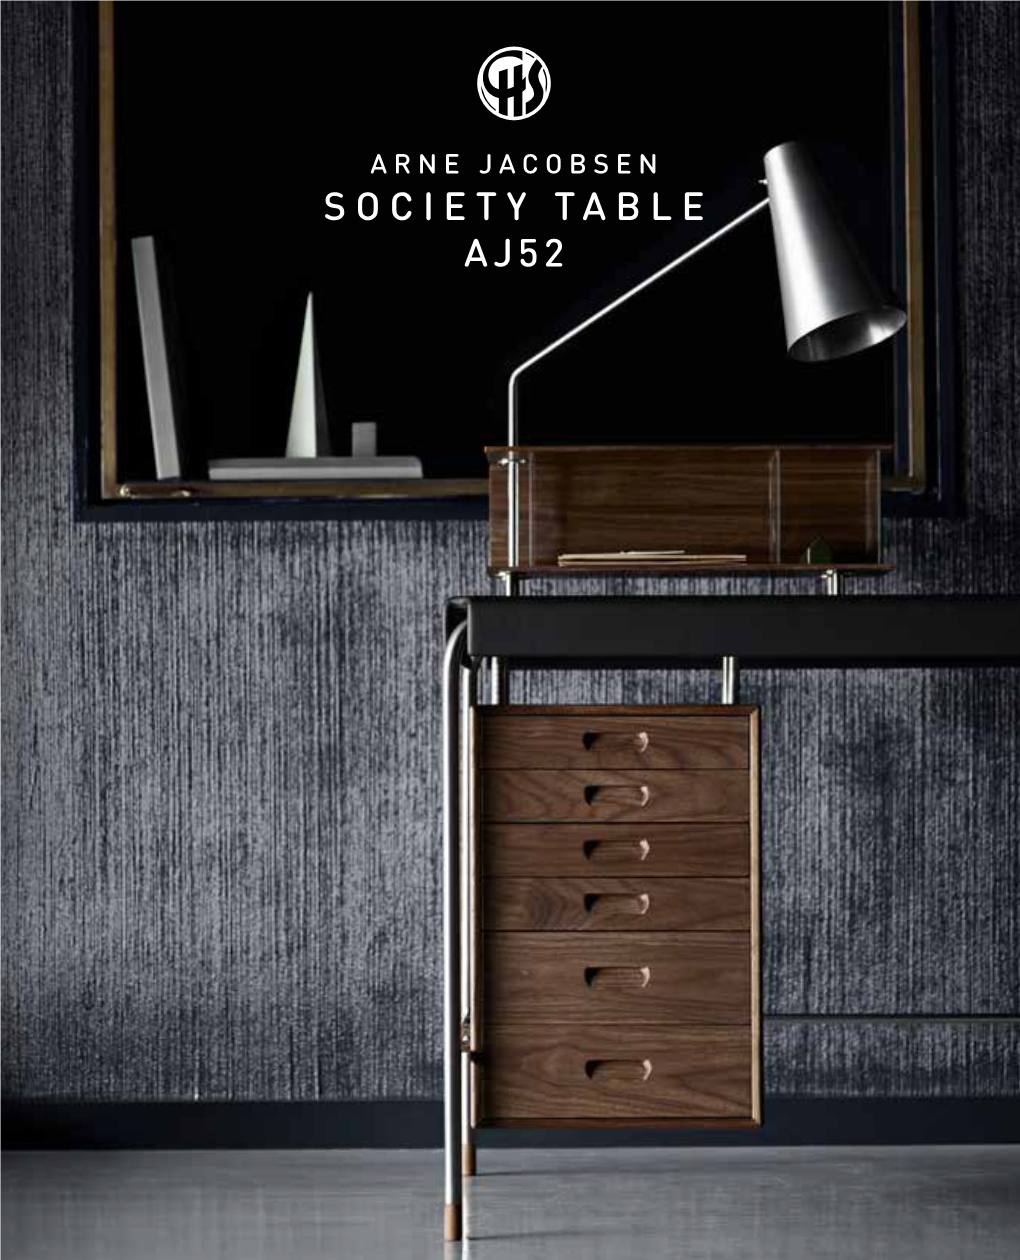 Society Table Aj52 Society Table a Unique Desk from Functionalism’S Leading Figure